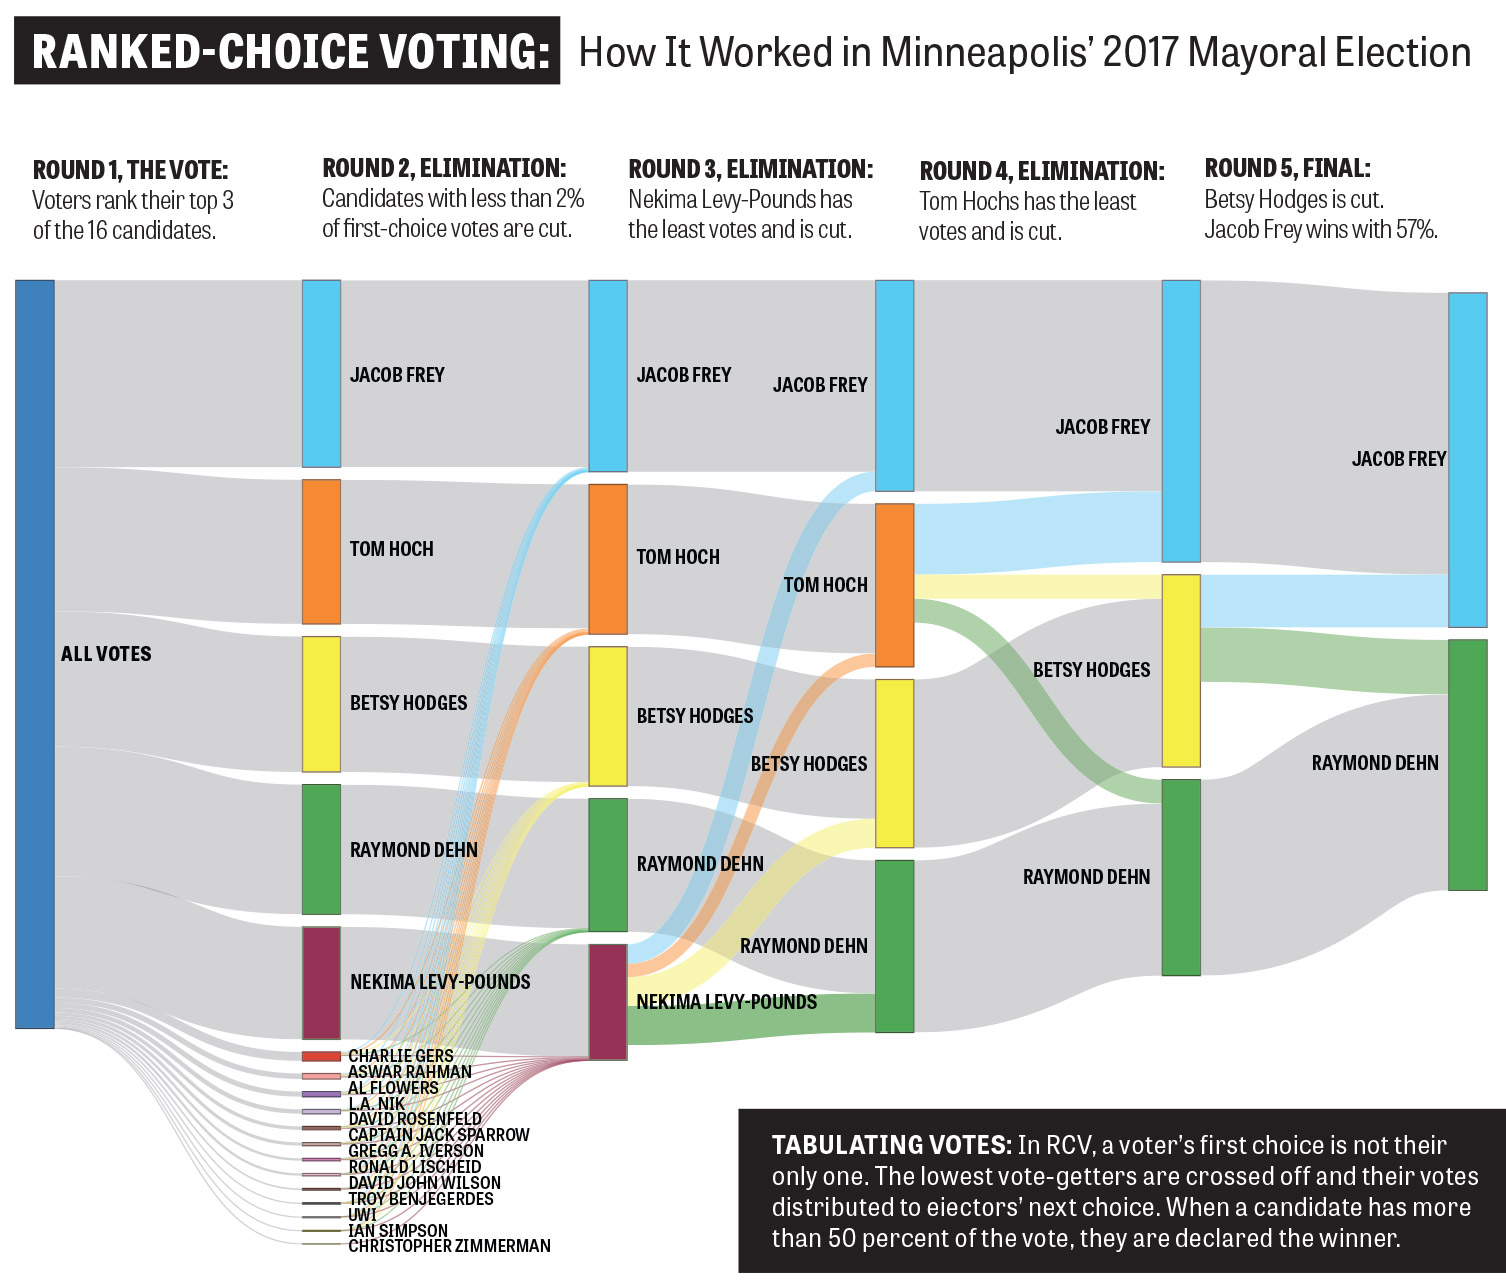 Graphics adapted with permission from City of Minneapolis.